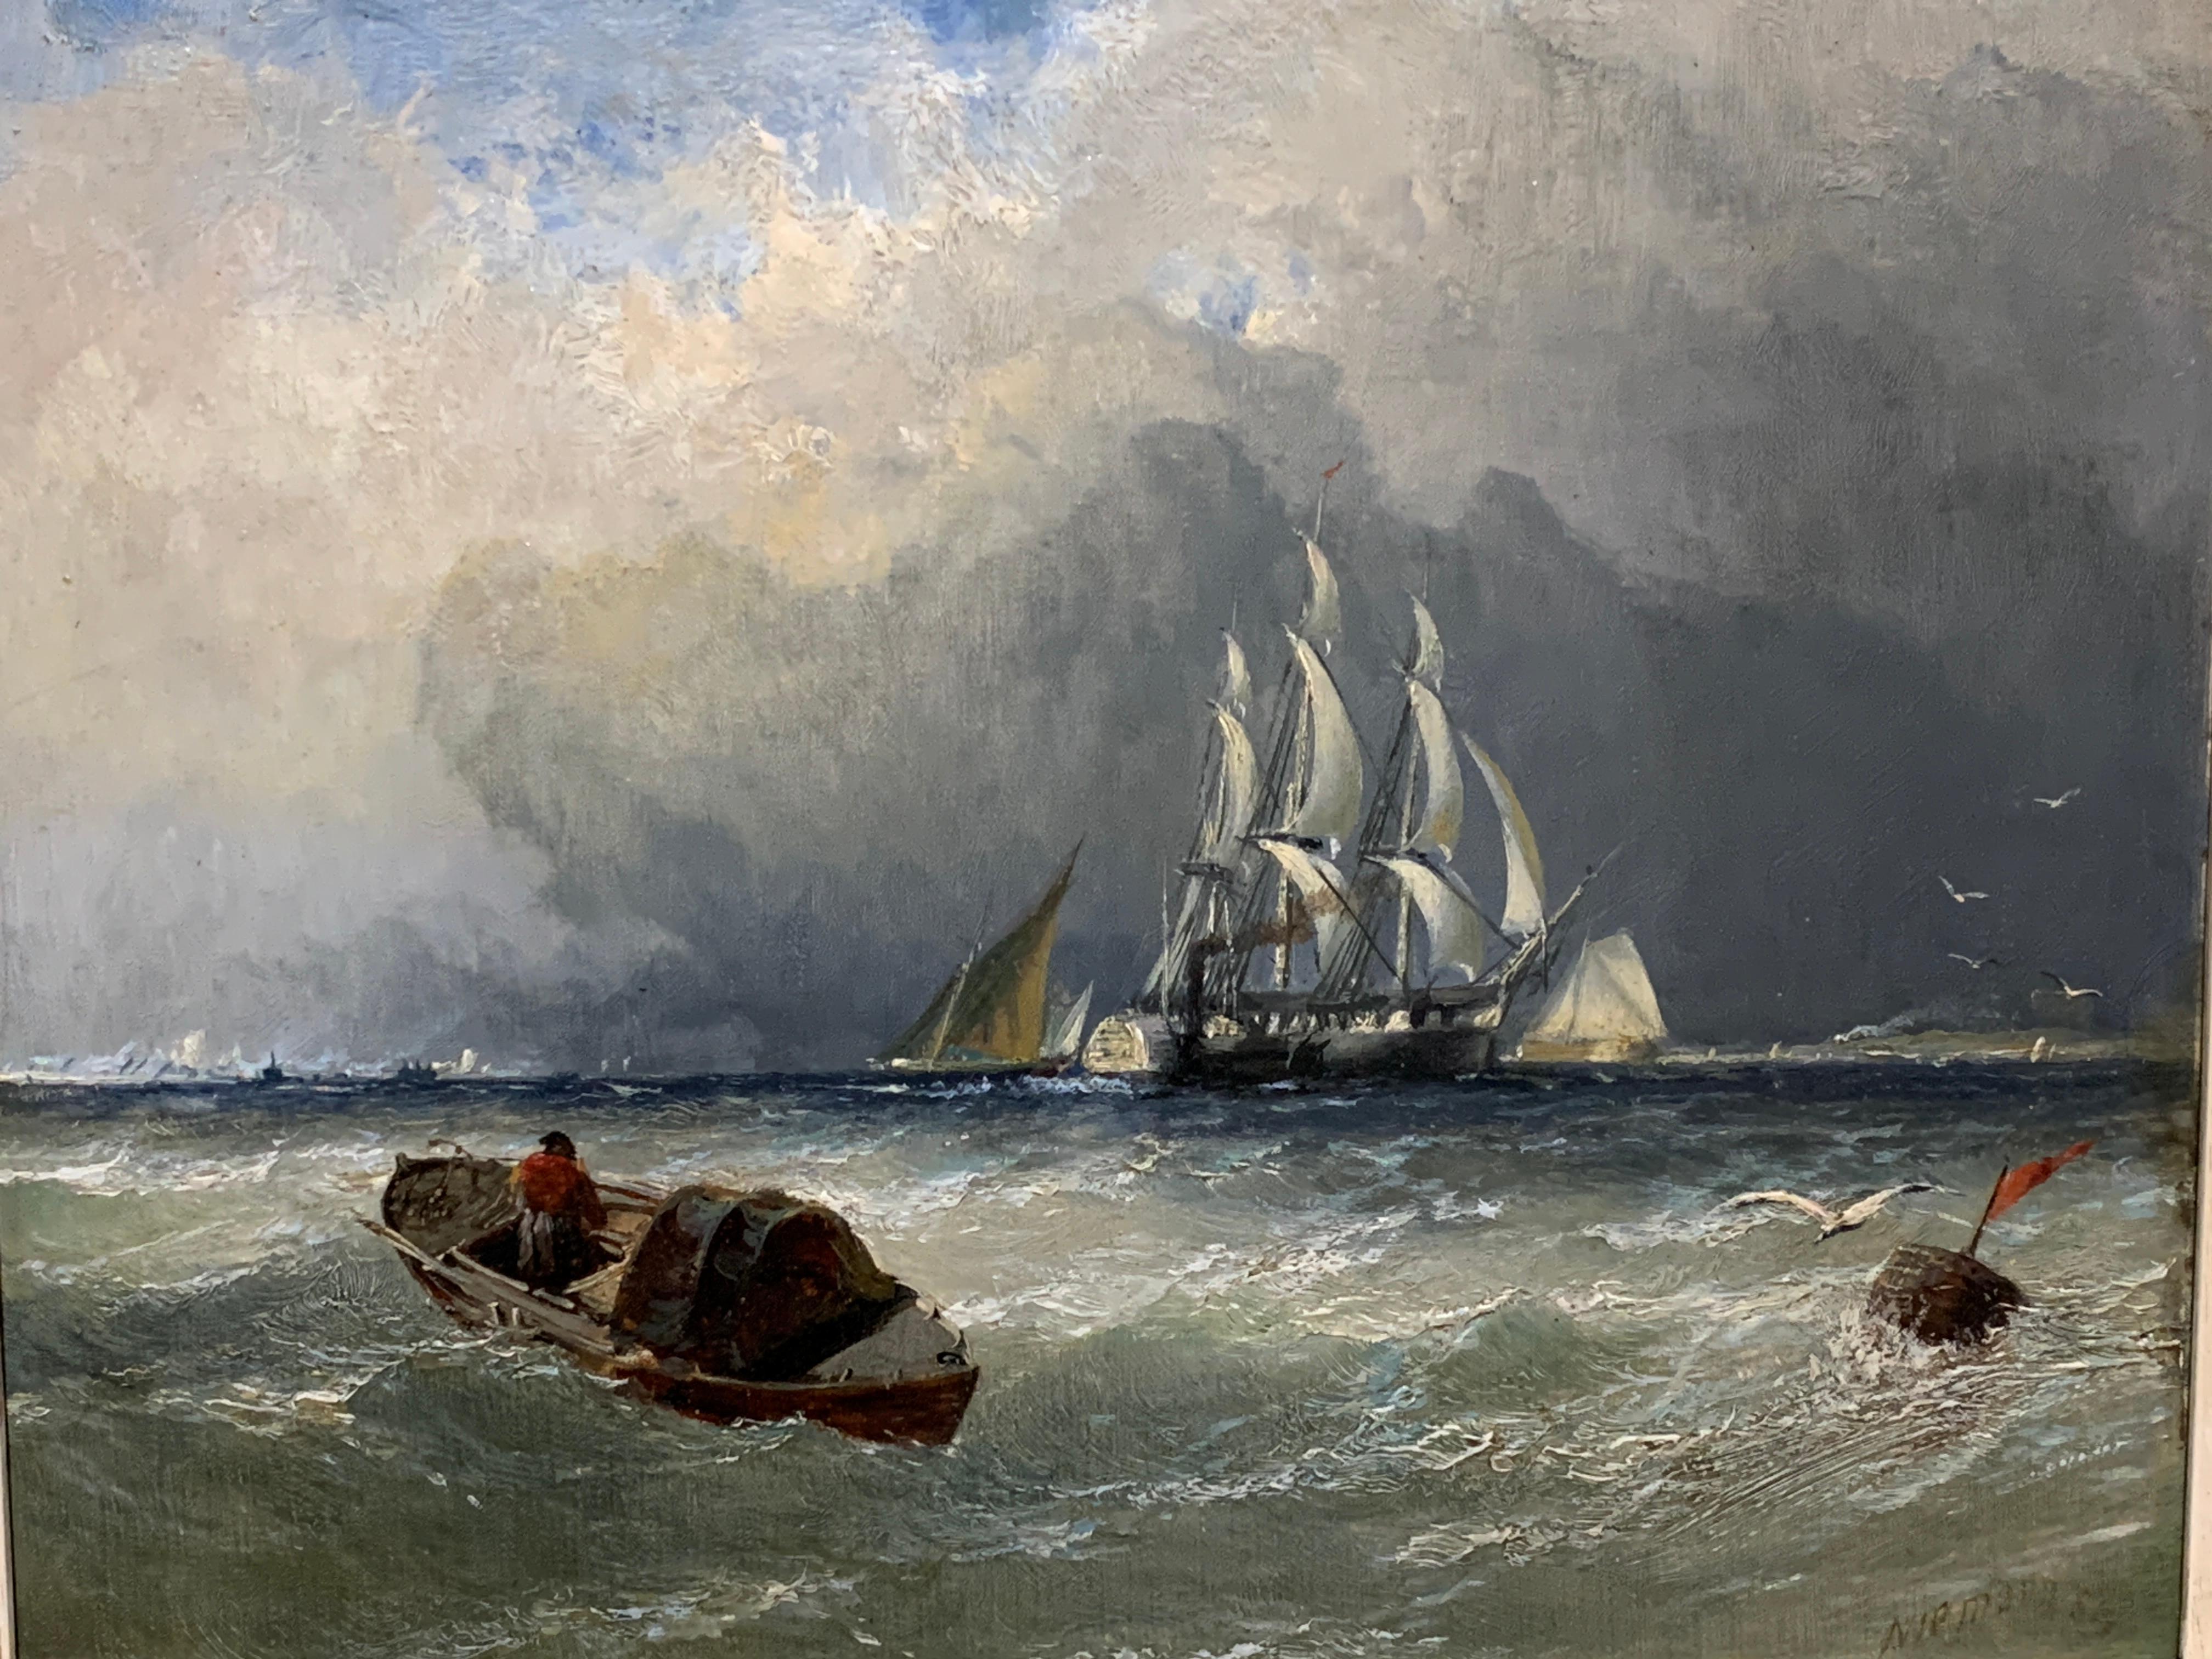 English Yacht, Sail Boat and Steamer off a coast with stormy sky. - Painting by Edmund John Niemann